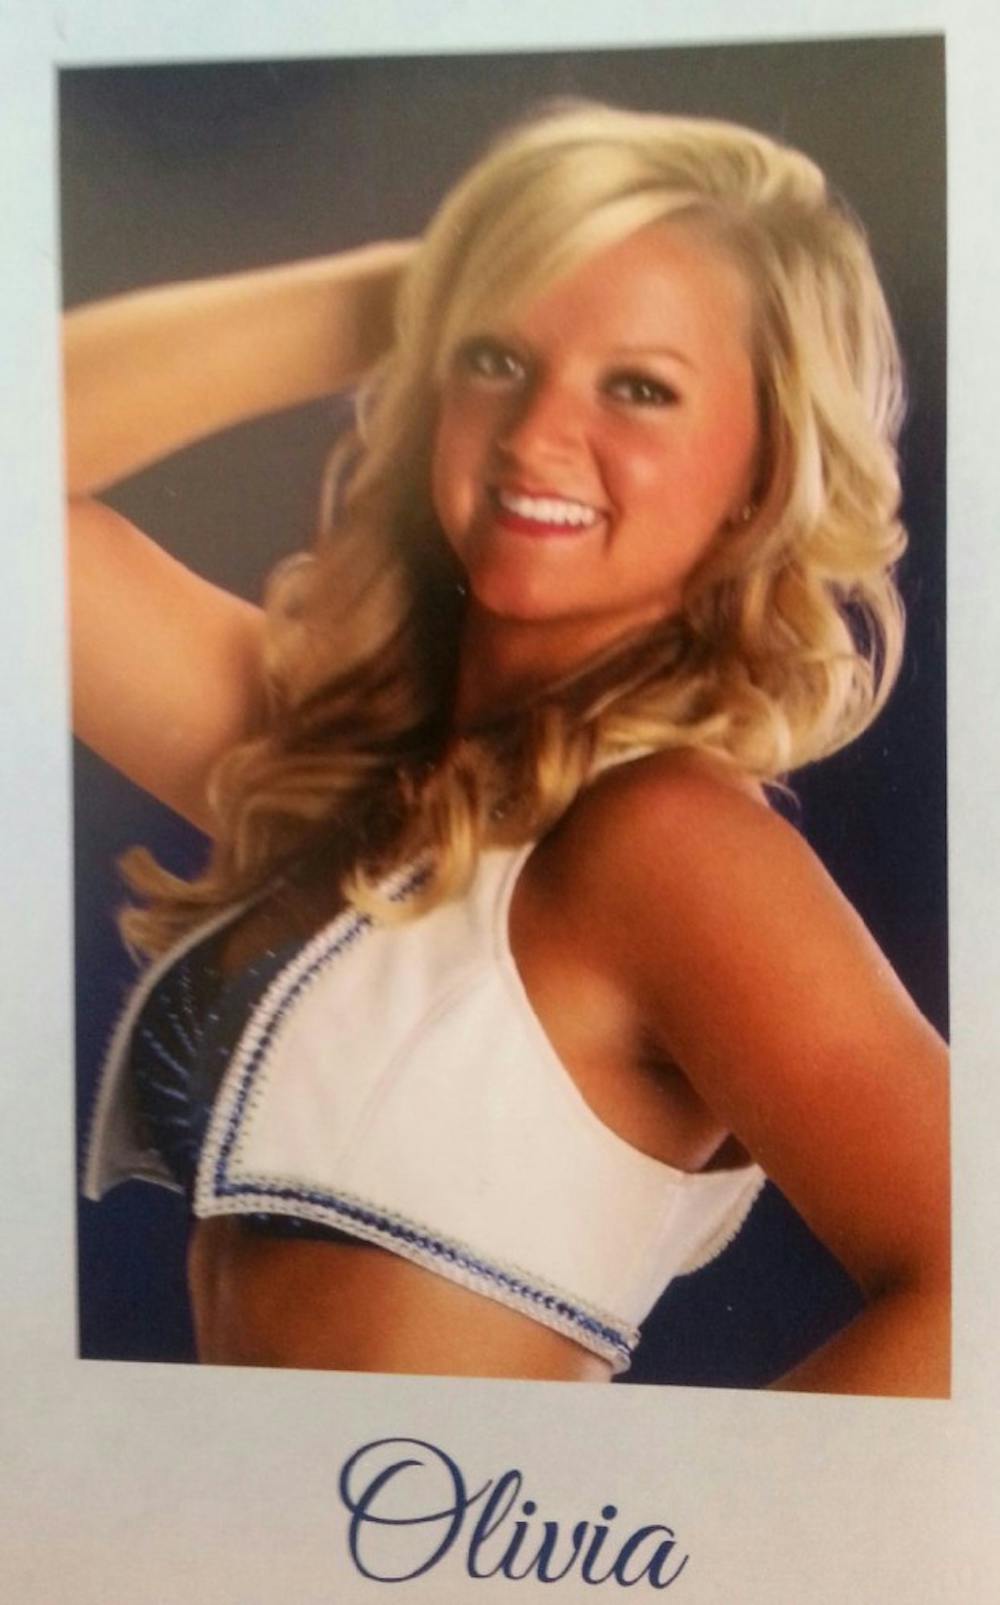 <p>Olivia is living her dream as an Indianapolis Colts cheerleader and performing in front of 67,000 screaming fans. Olivia was part of the Code Red Dance Team during her time at Ball State. PHOTO COURTESY OF INDIANAPOLIS COLTS</p>